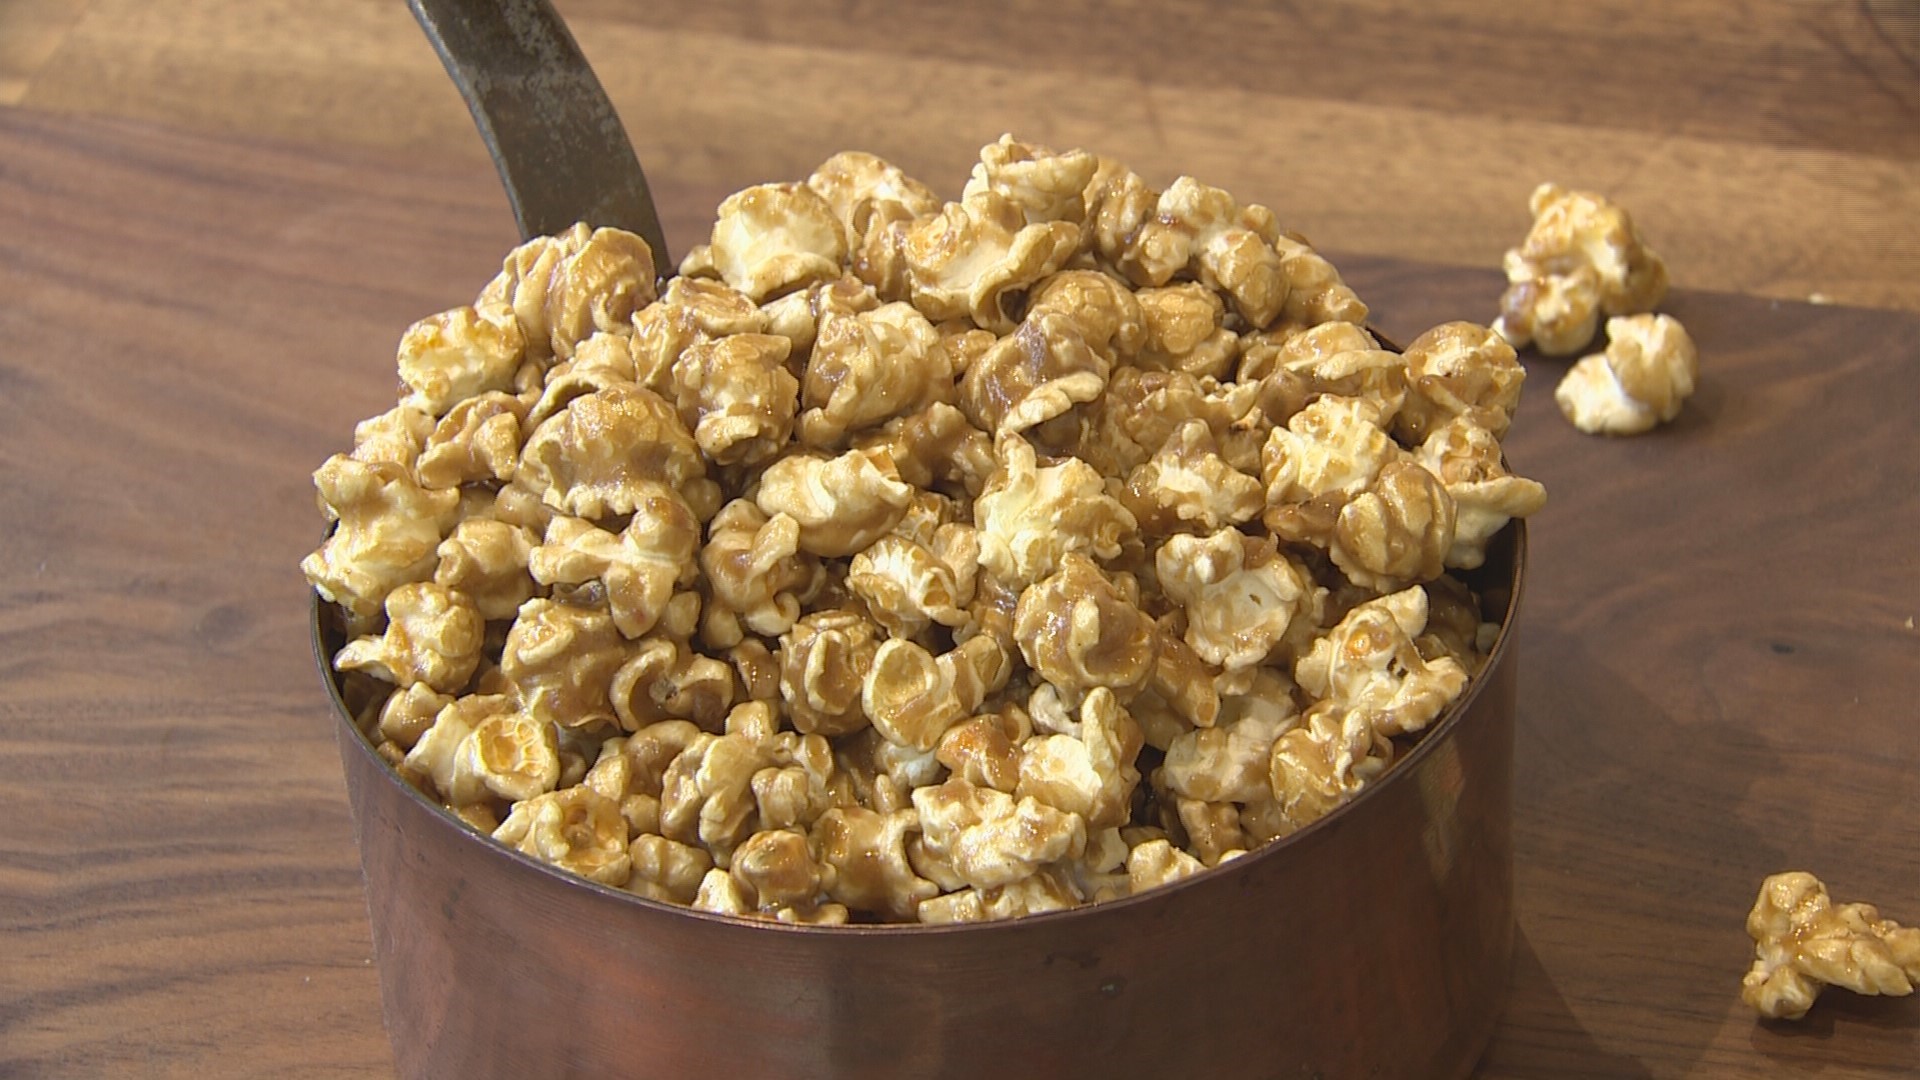 Cobb's Popcorn in Pike Place Market limits customers to two bags per visit. #k5evening